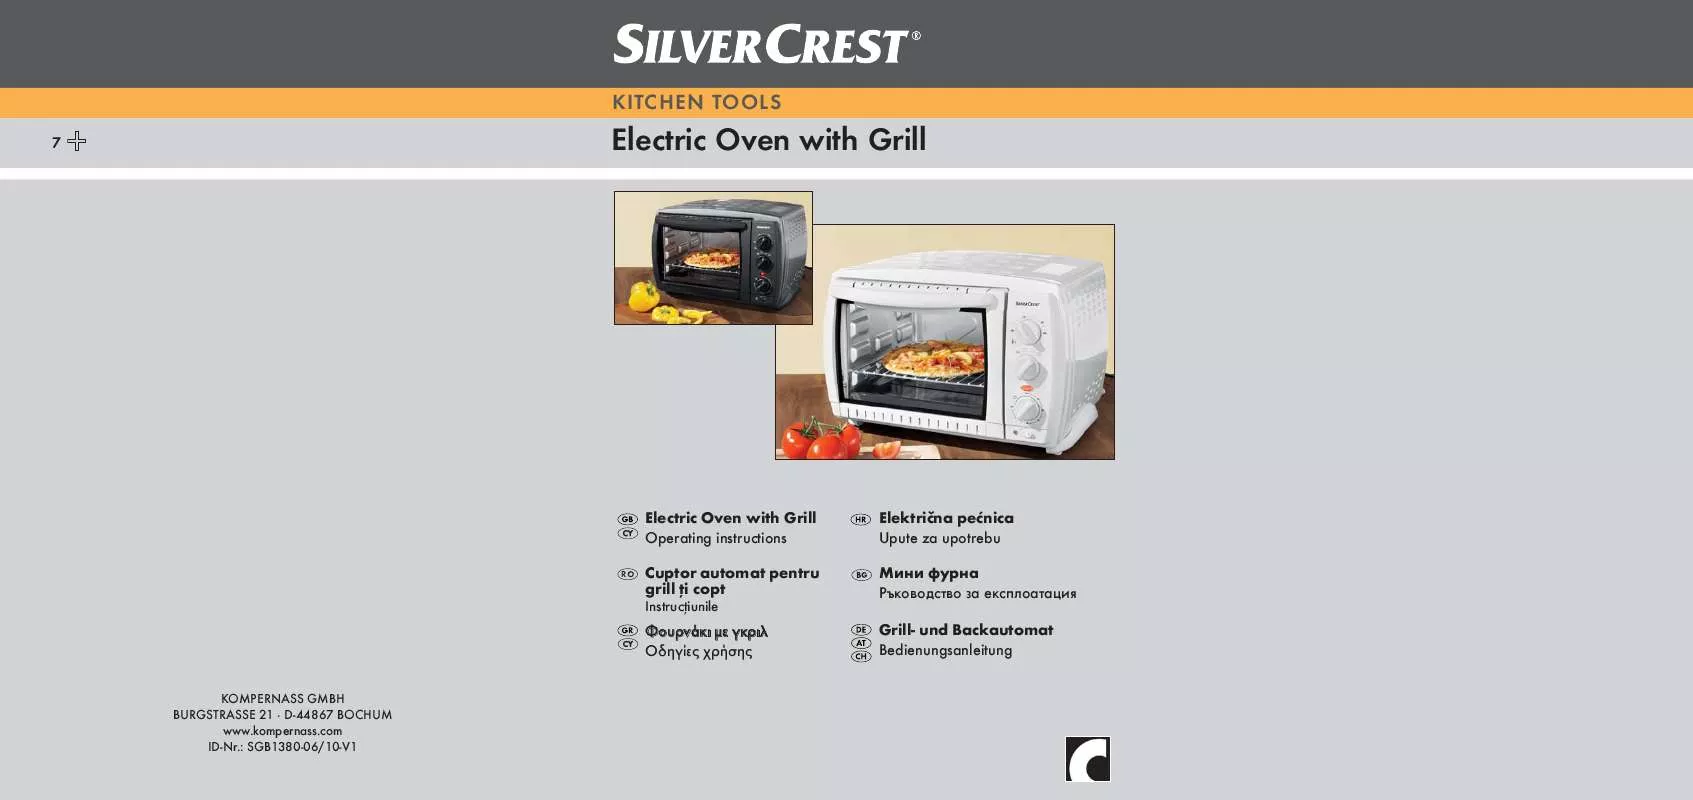 Mode d'emploi SILVERCREST SGB 1380 A1 ELECTRIC OVEN WITH GRILL